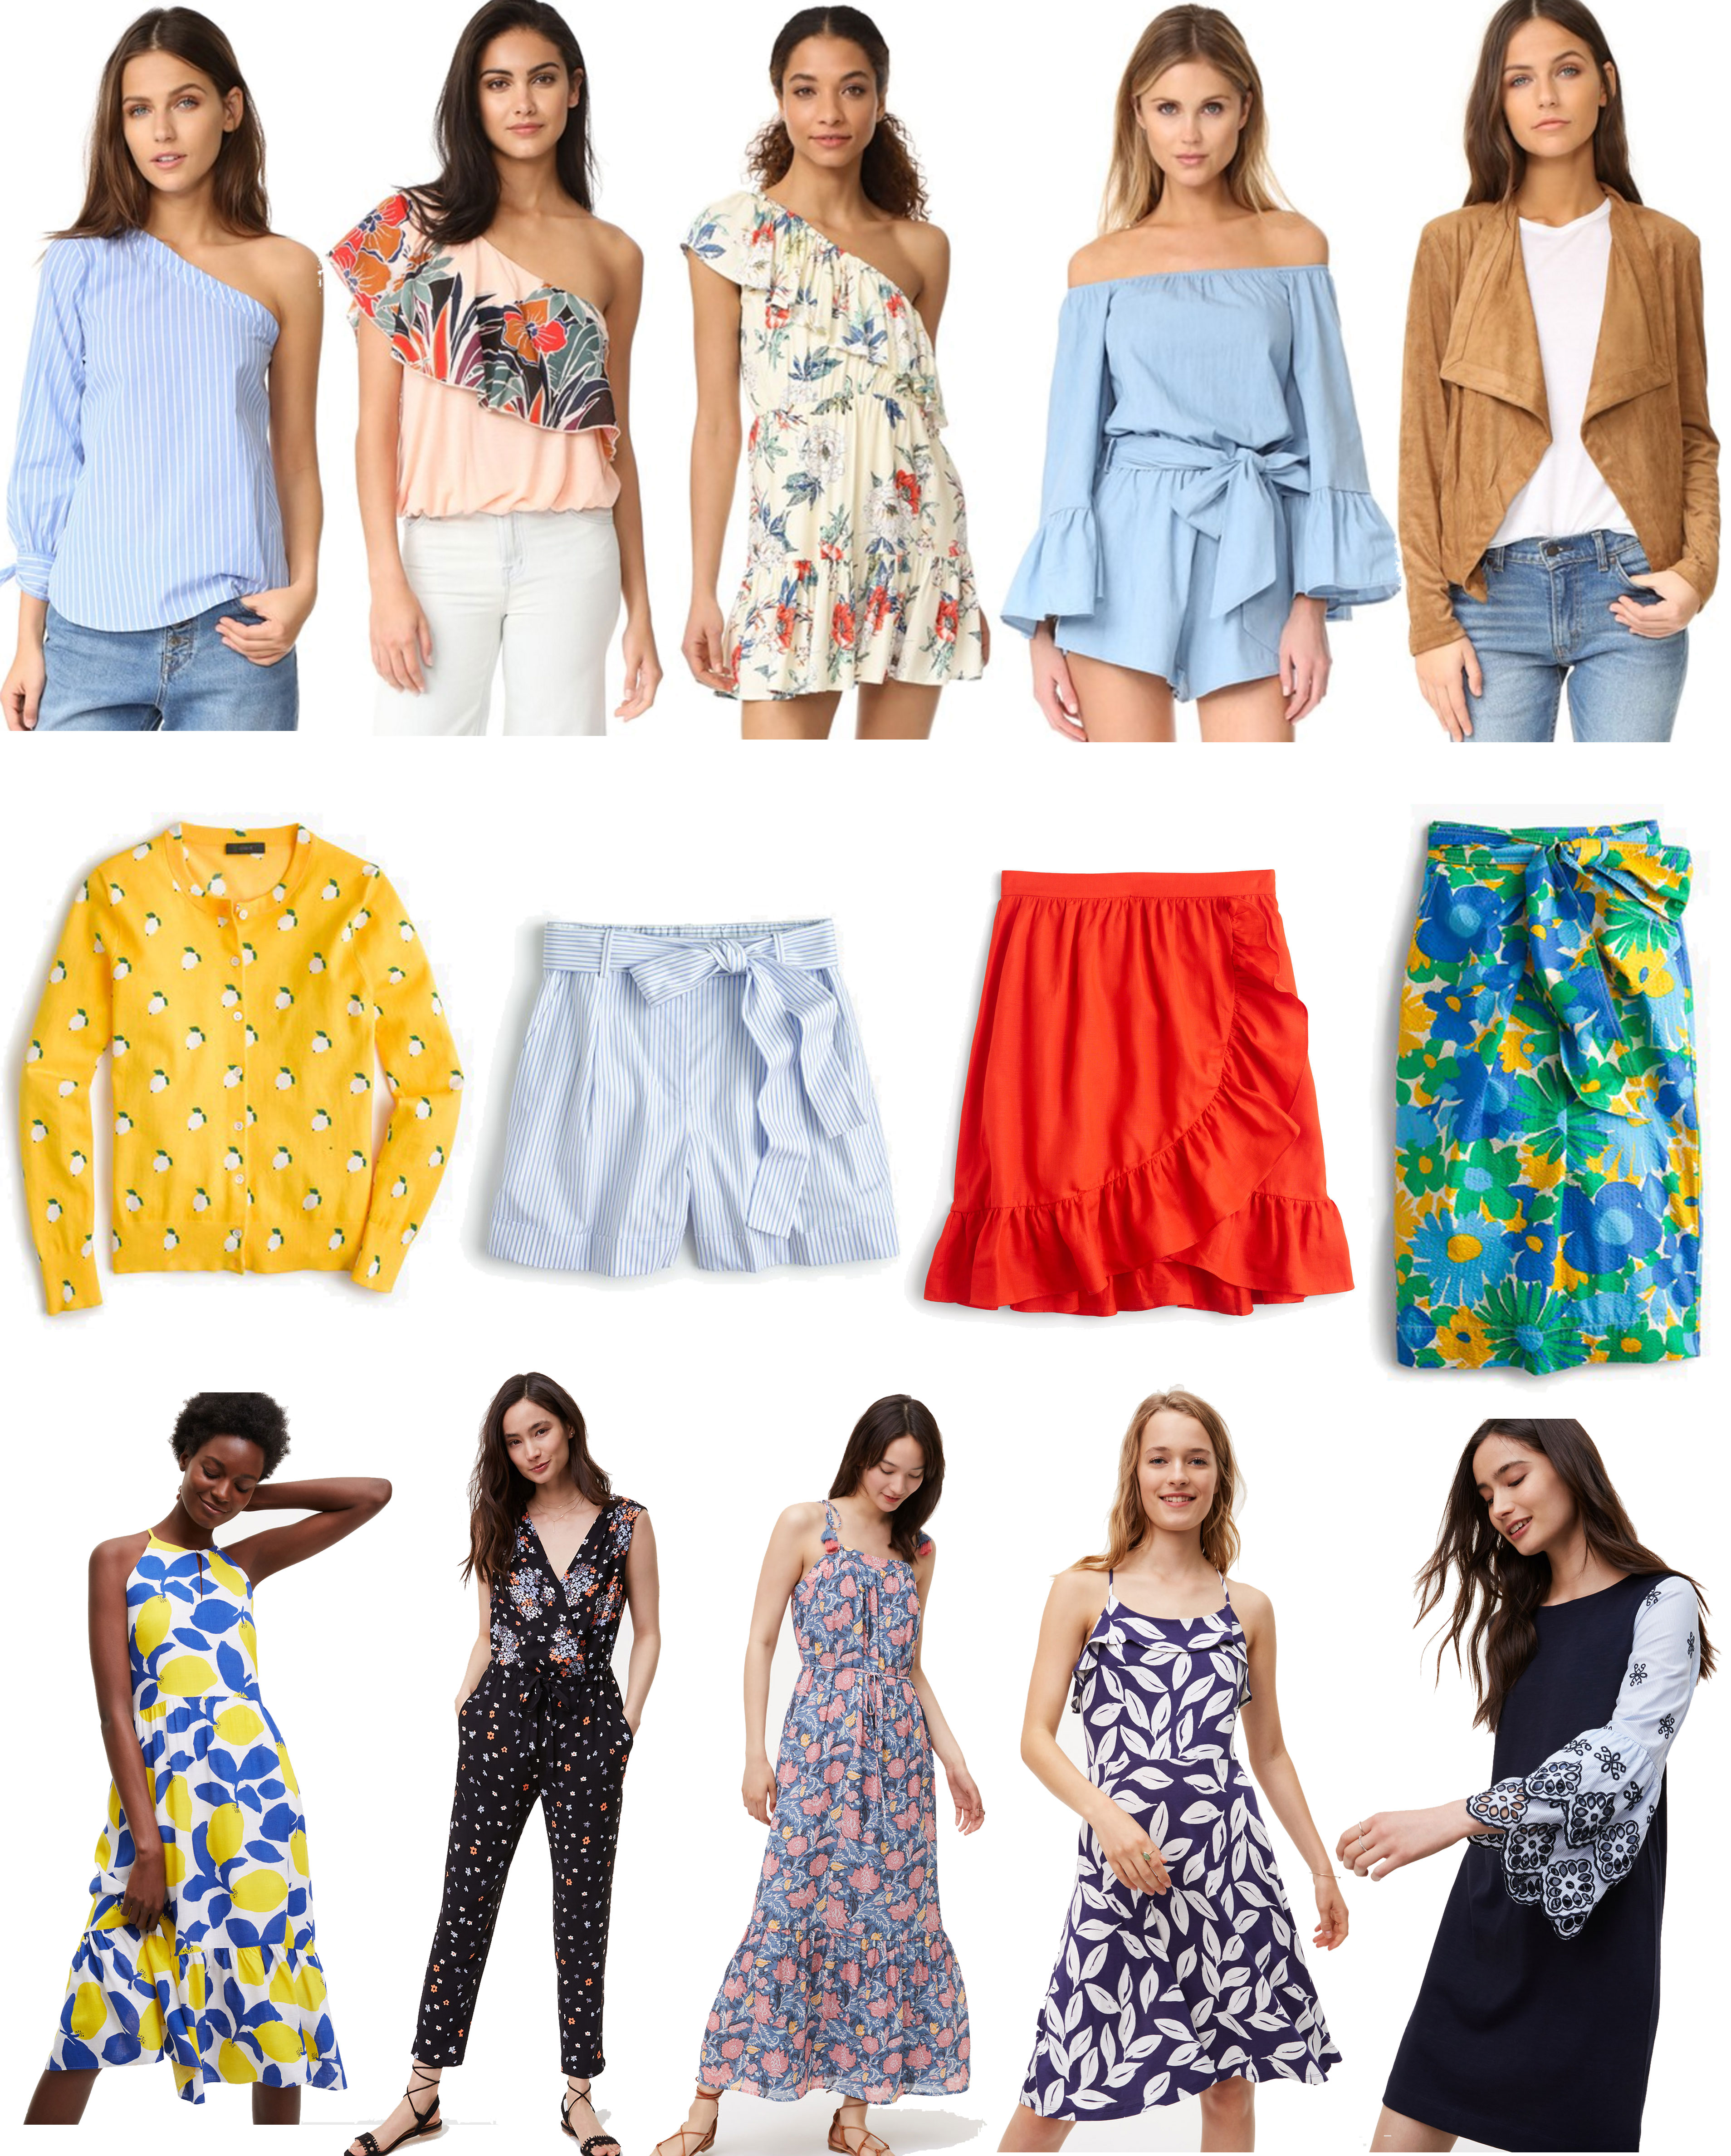 Weekend Sales + Deals by Dallas petite fashion blogger Kileen of cute and little